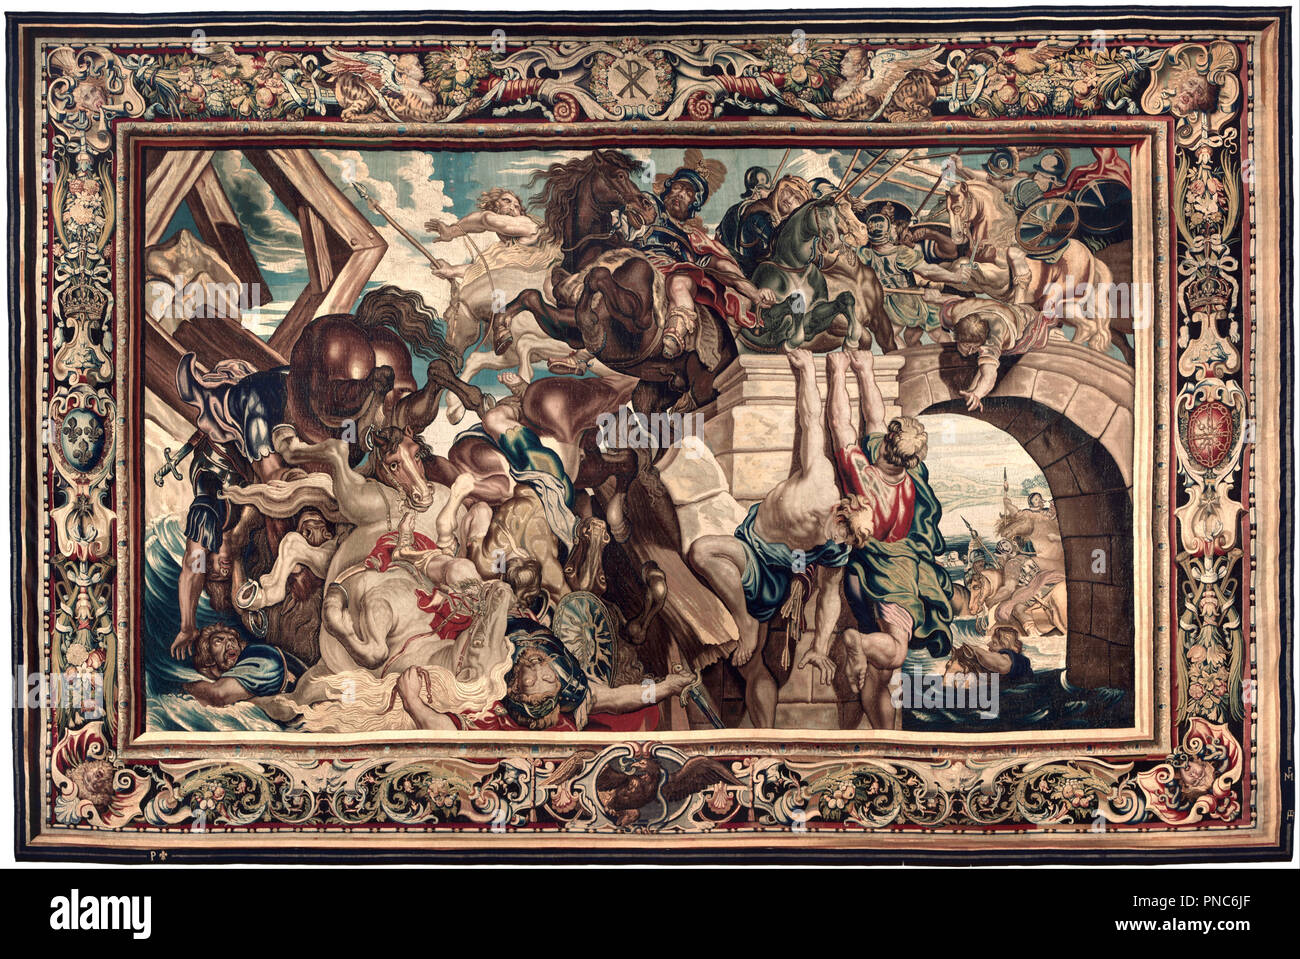 Tapestry showing the Triumph of Constantine over Maxentius at the Battle of the Milvian Bridge. Date/Period: From 1623 until 25. Textiles. Wool and silk with gold and silver threads Wool and silk with gold and silver threads. Height: 4,855.21 mm (15.92 ft); Width: 7,447.53 mm (24.43 ft). Author: PETER PAUL RUBENS. Stock Photo